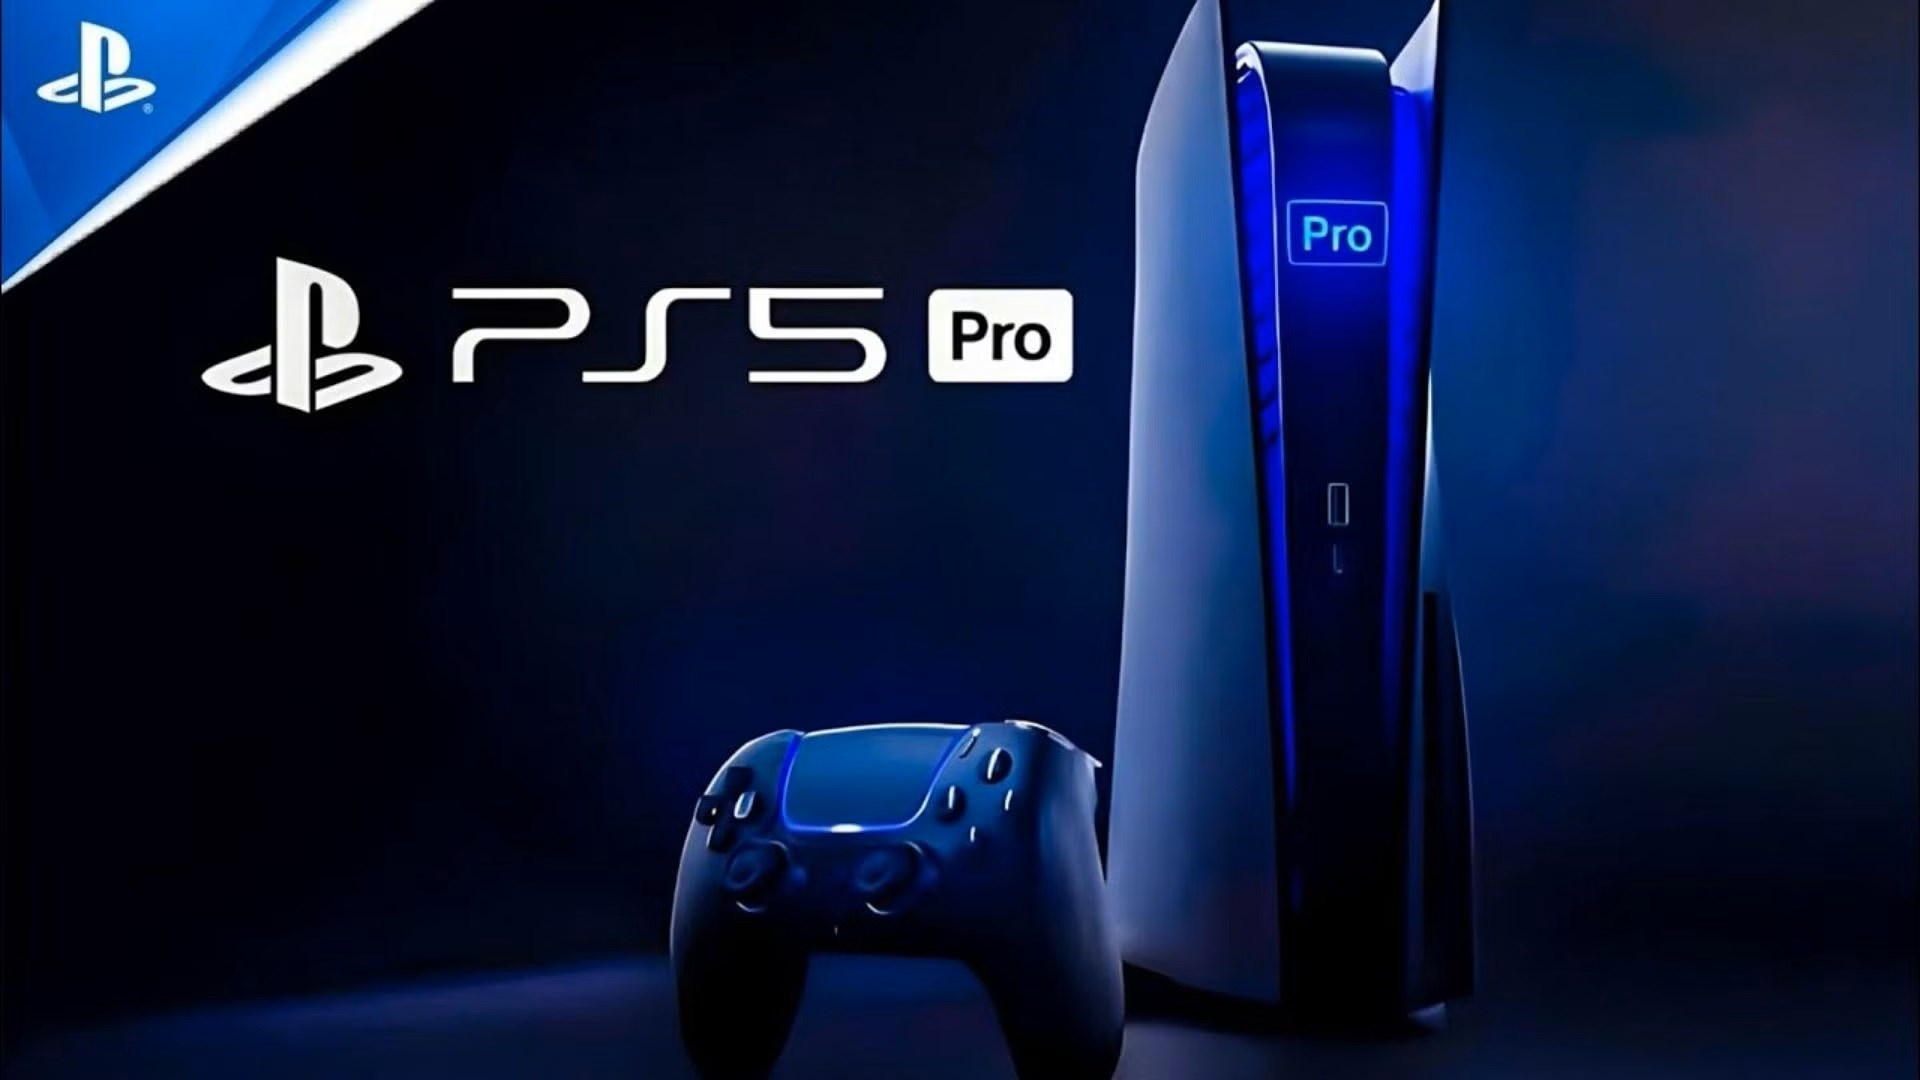 Sony teases Pro version for PlayStation 5